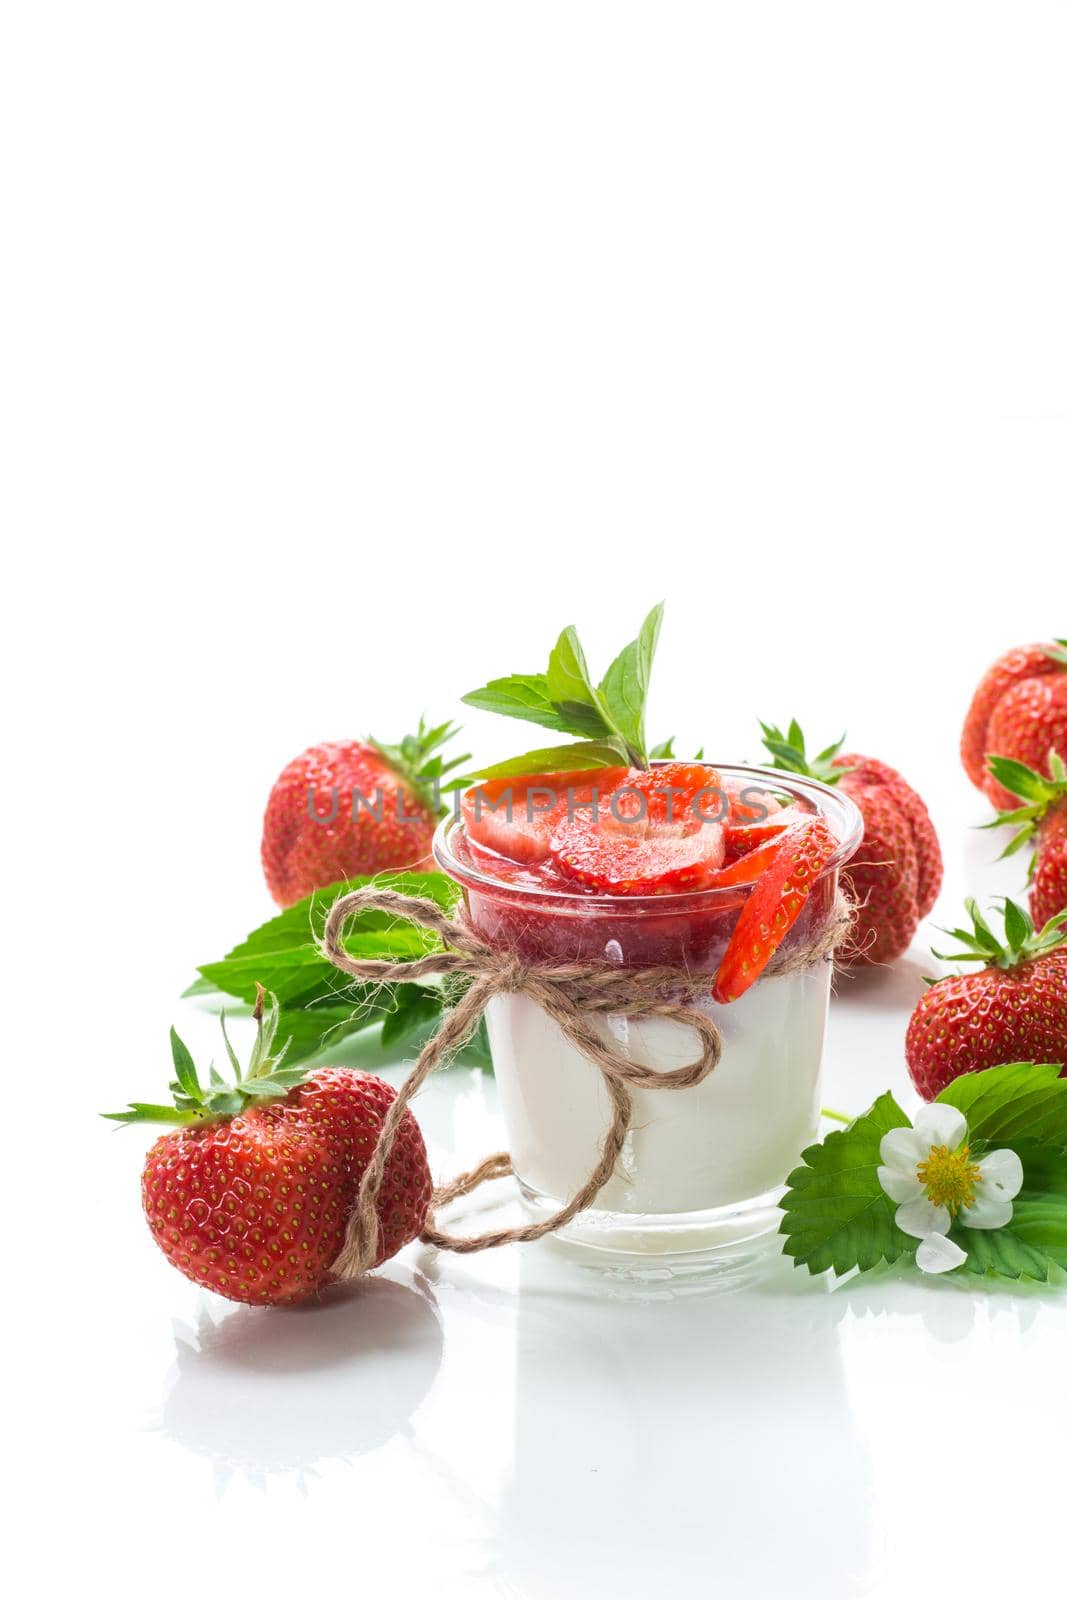 sweet homemade yogurt with strawberry jam and fresh strawberries in a glass cup by Rawlik